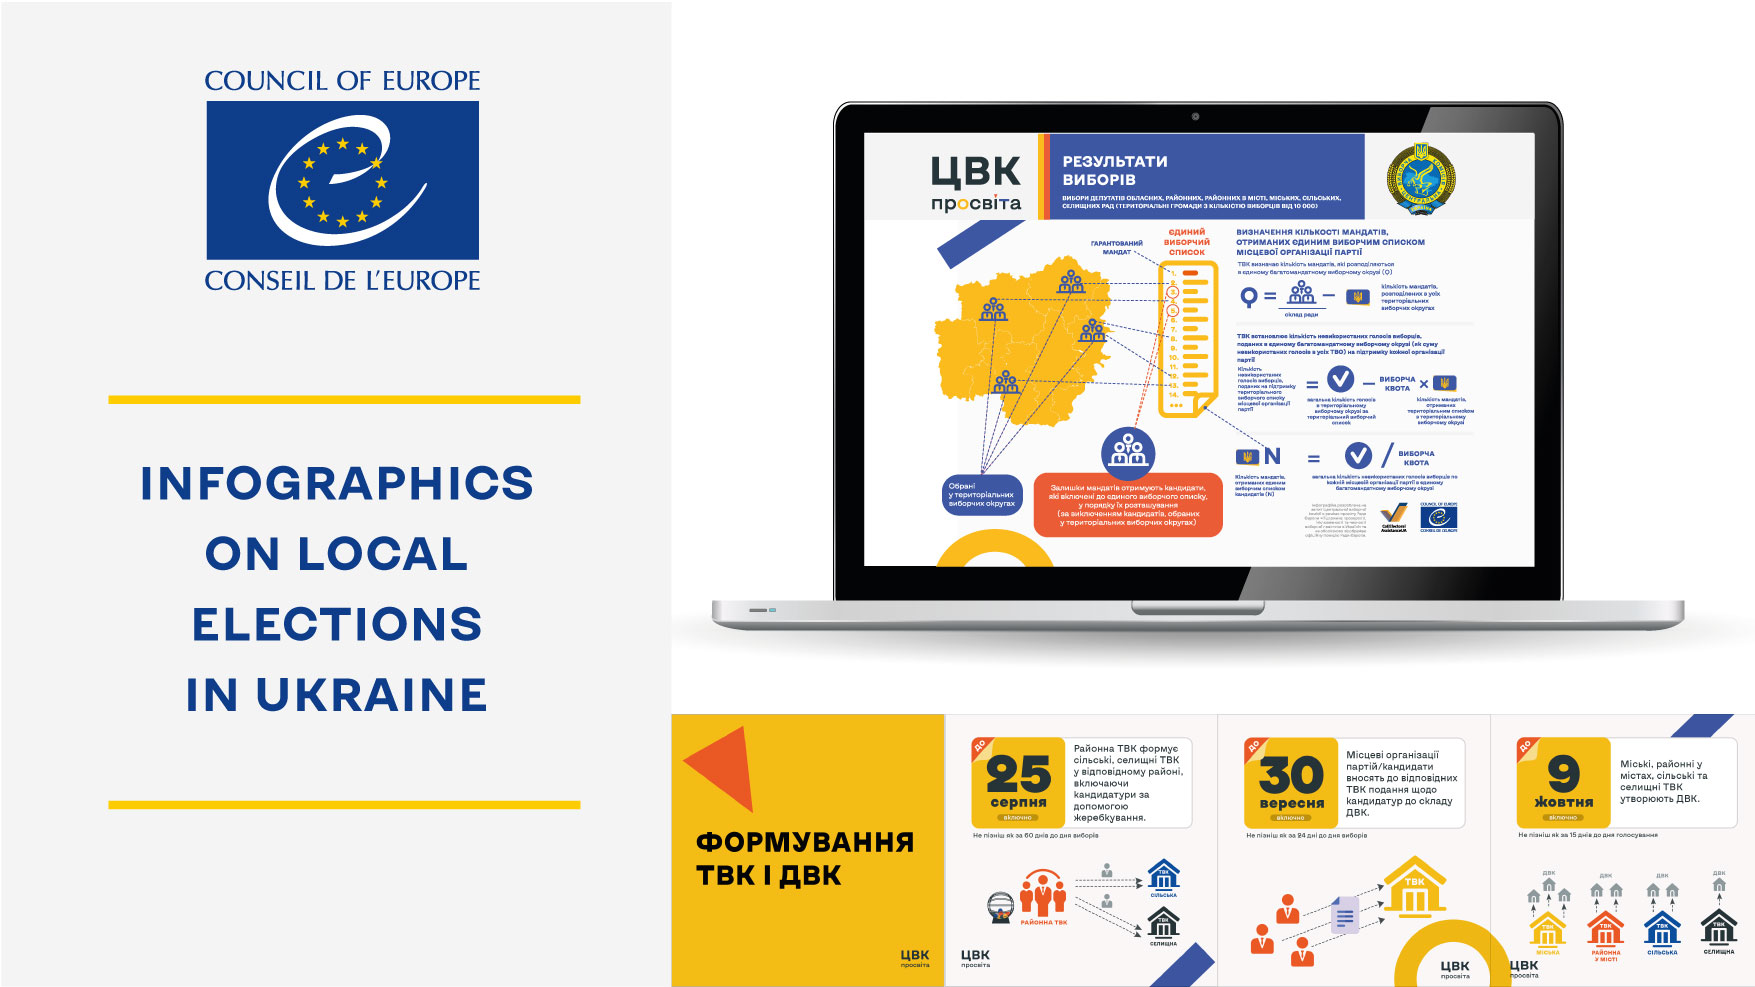 Series of infographics ‘CEC: Prosvita’ – local elections in Ukraine in simple terms